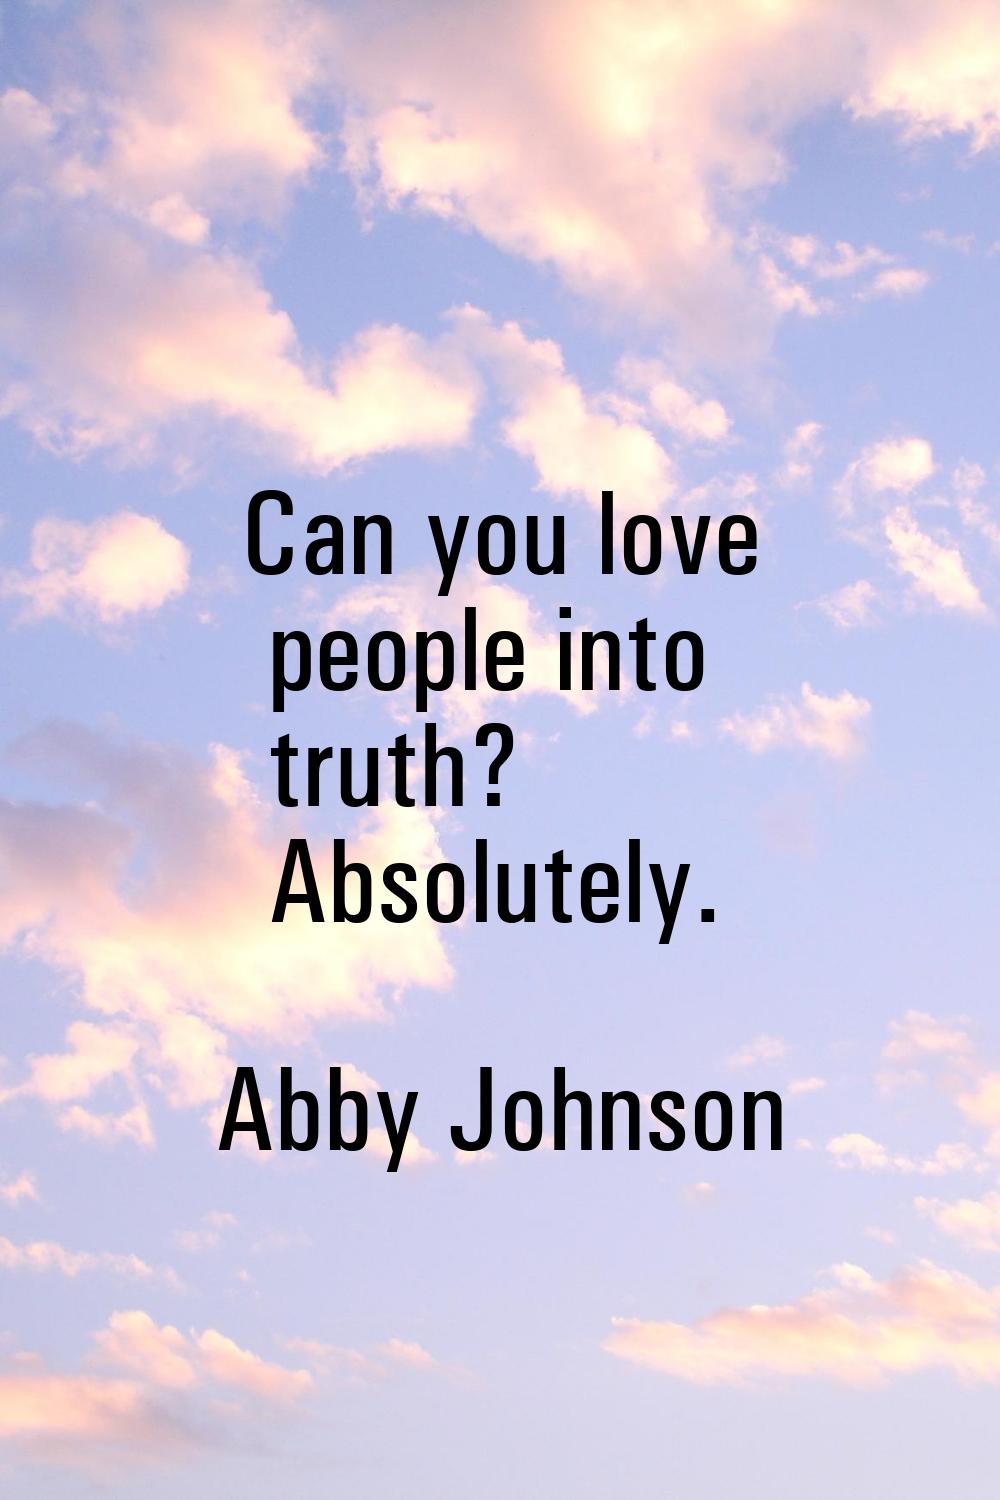 Can you love people into truth? Absolutely.